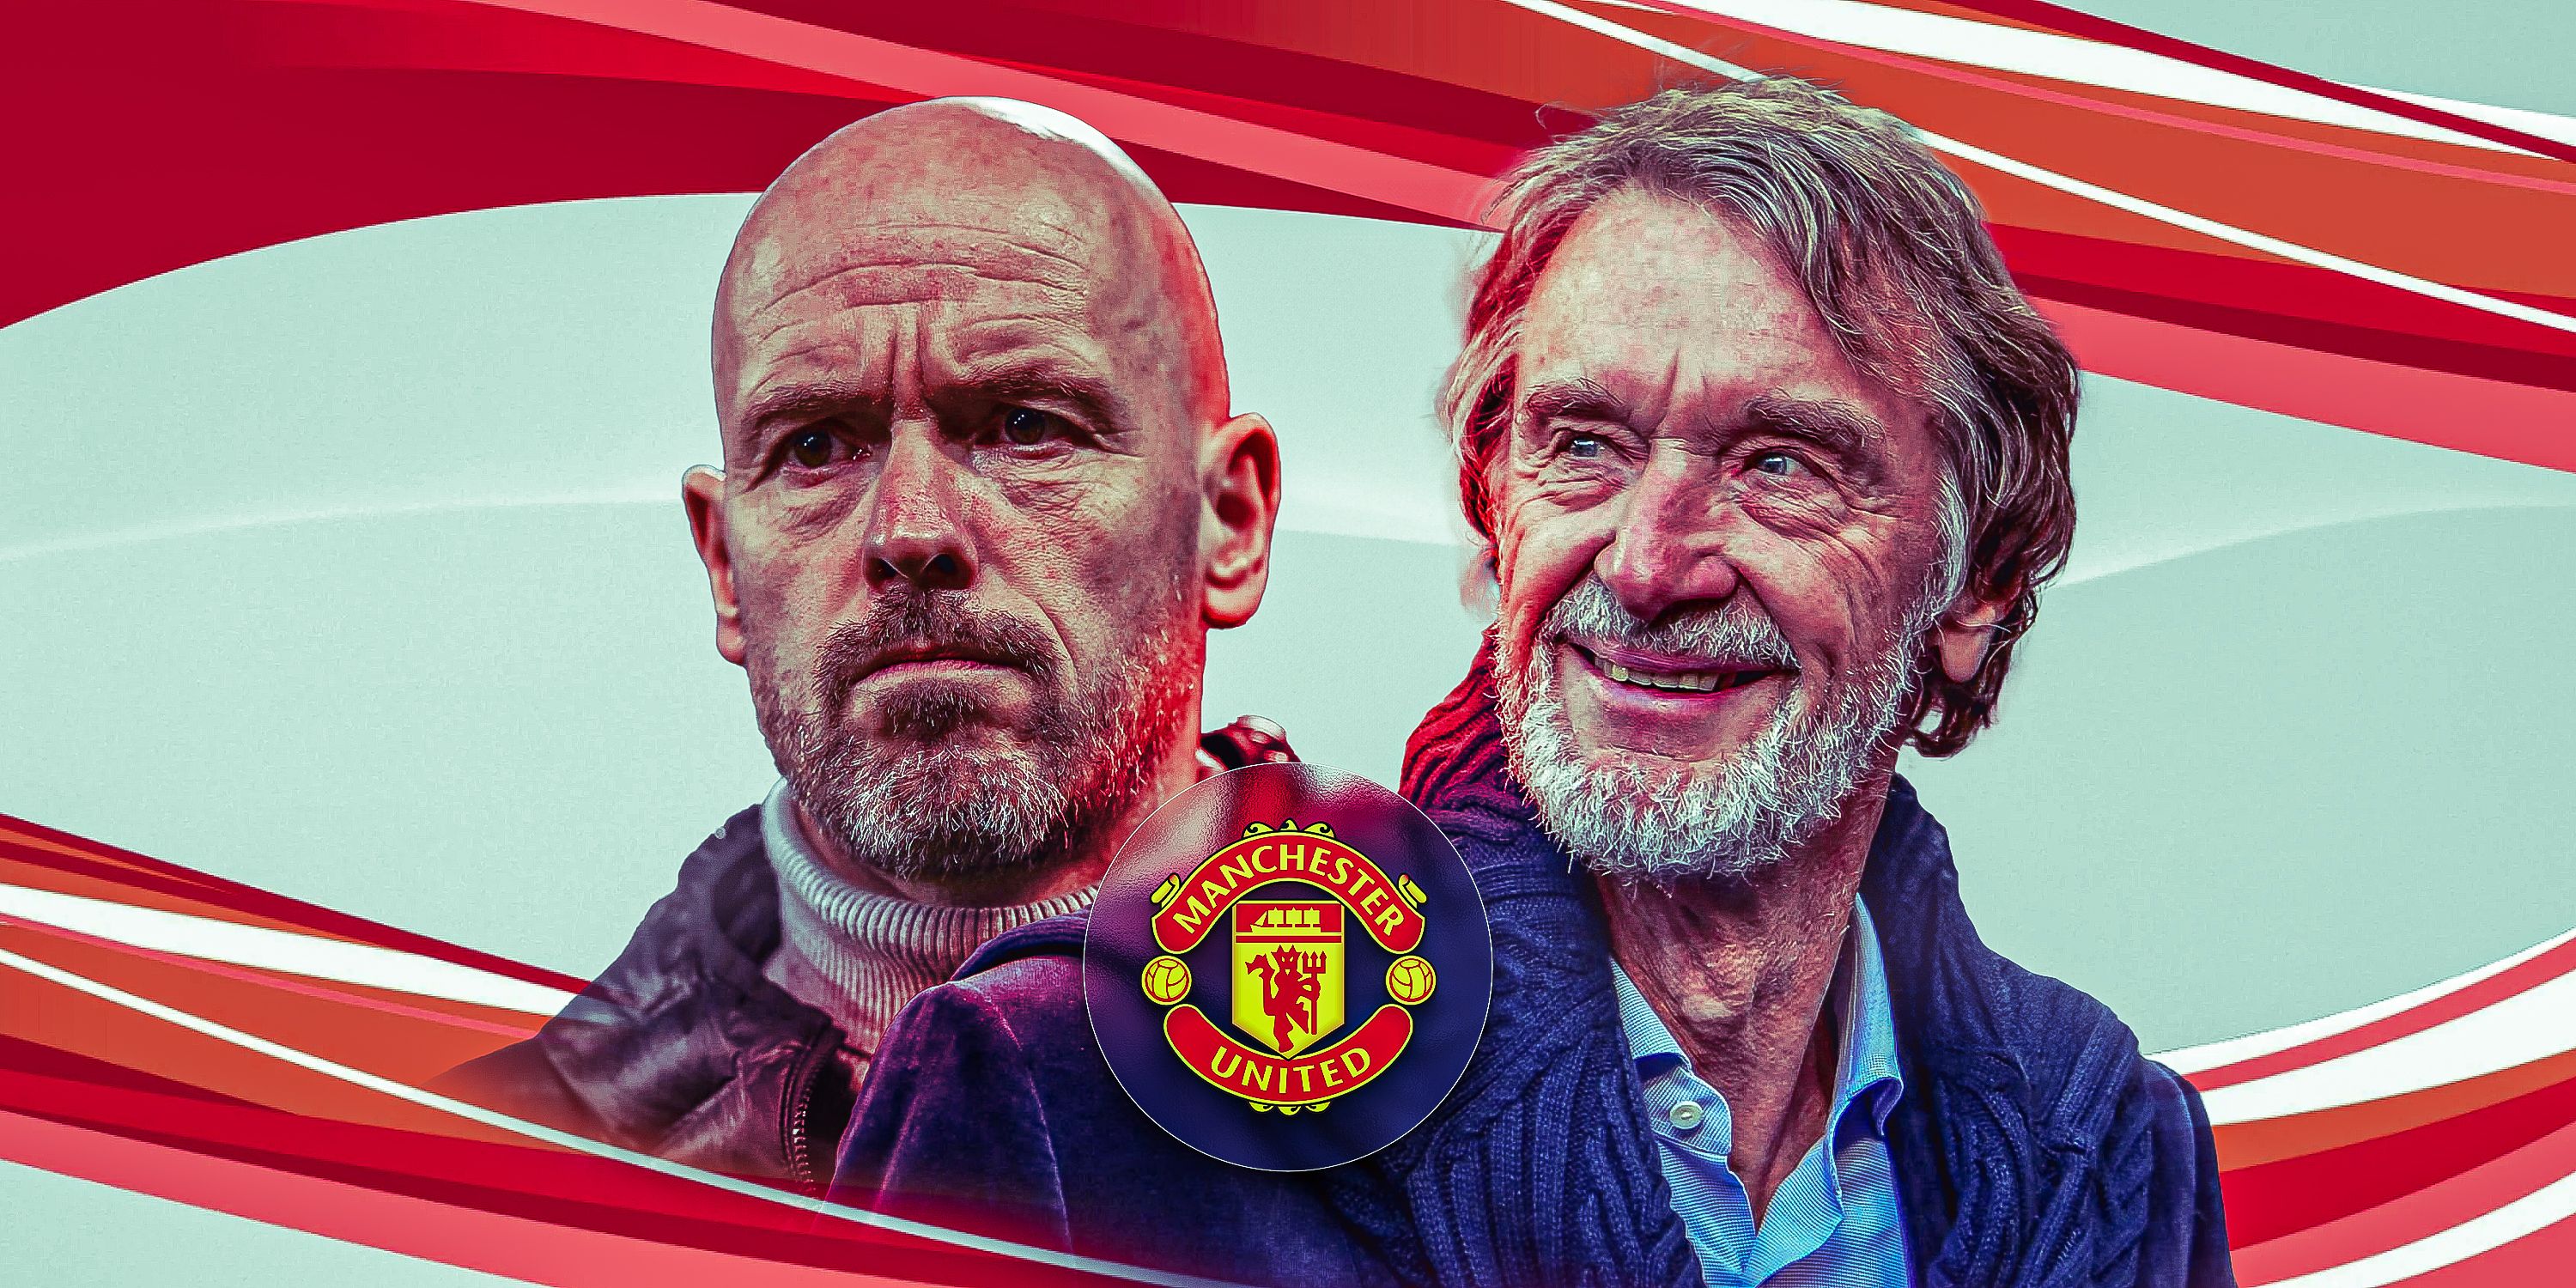 Manchester United manager Erik ten Hag and owner Sir Jim Ratcliffe